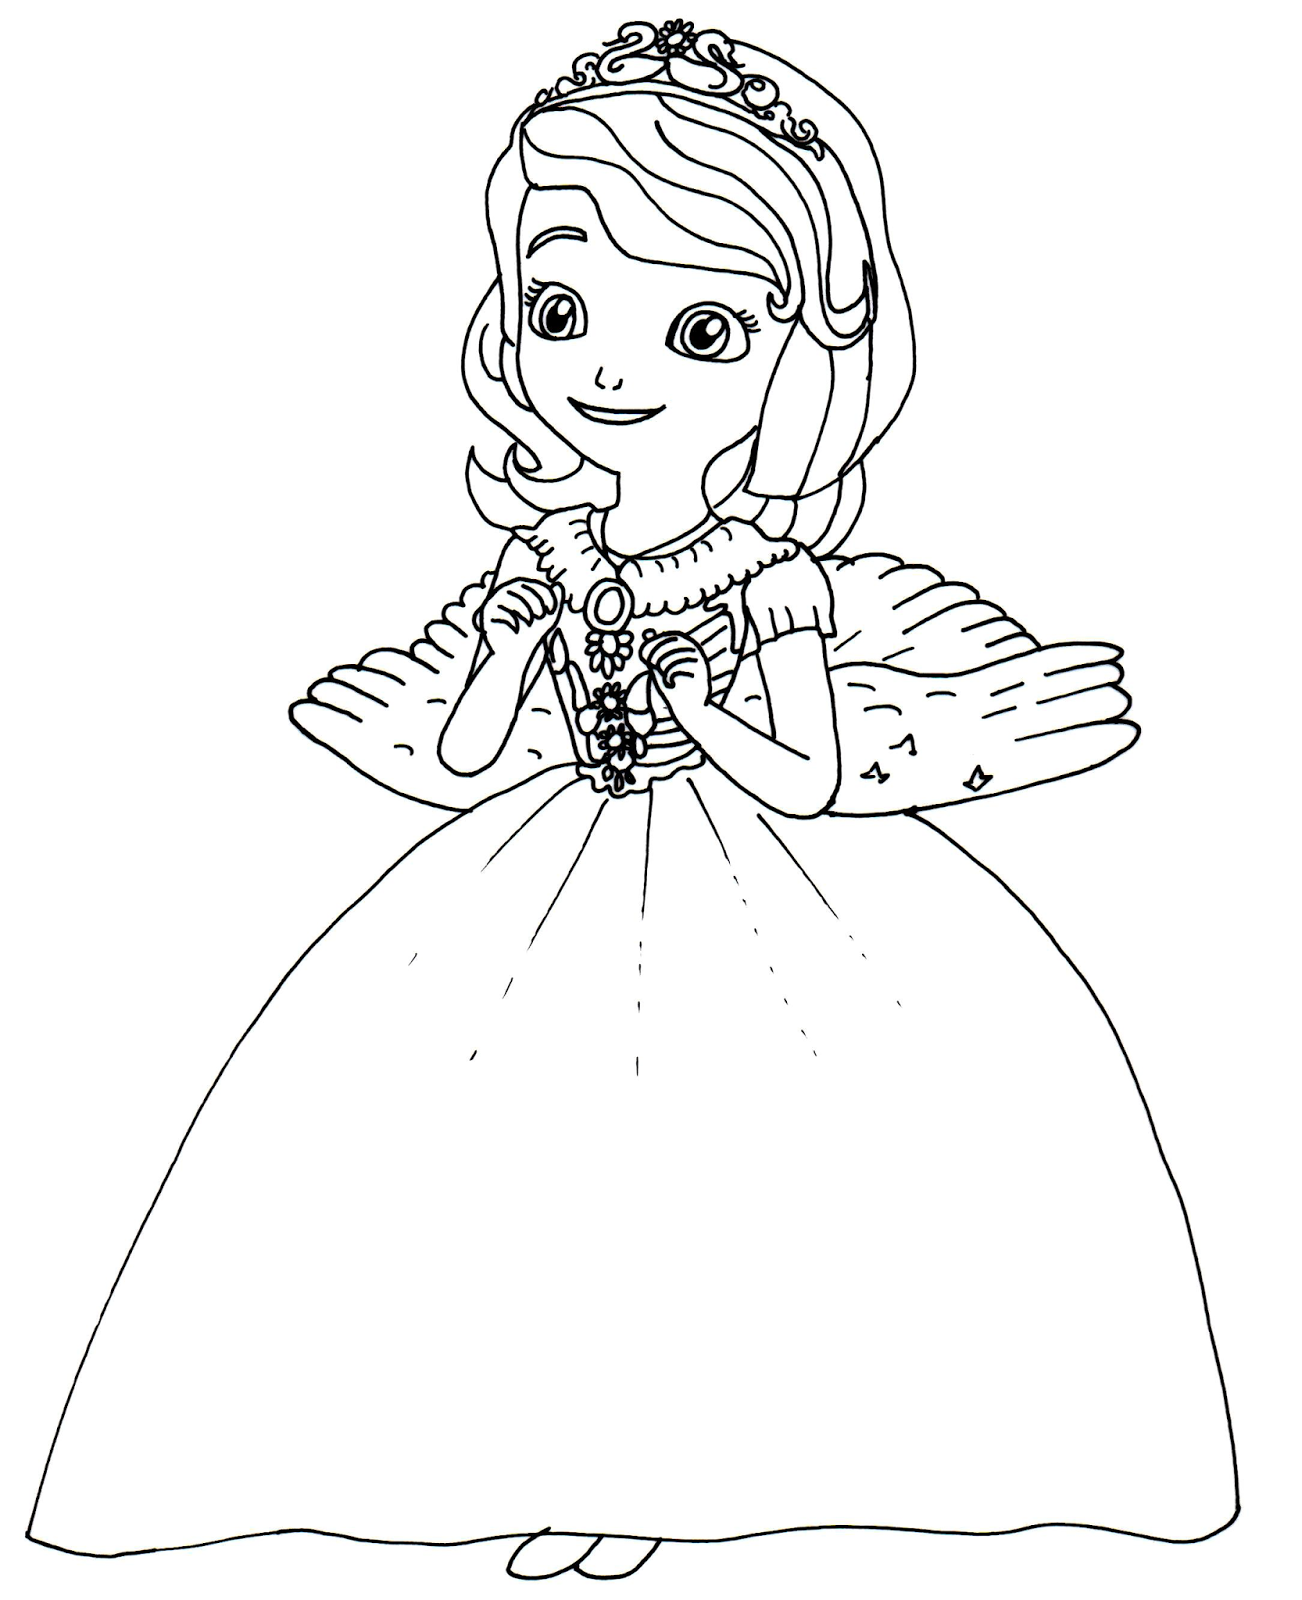 Sofia The First Coloring Pages March 2014 Coloring Wallpapers Download Free Images Wallpaper [coloring365.blogspot.com]